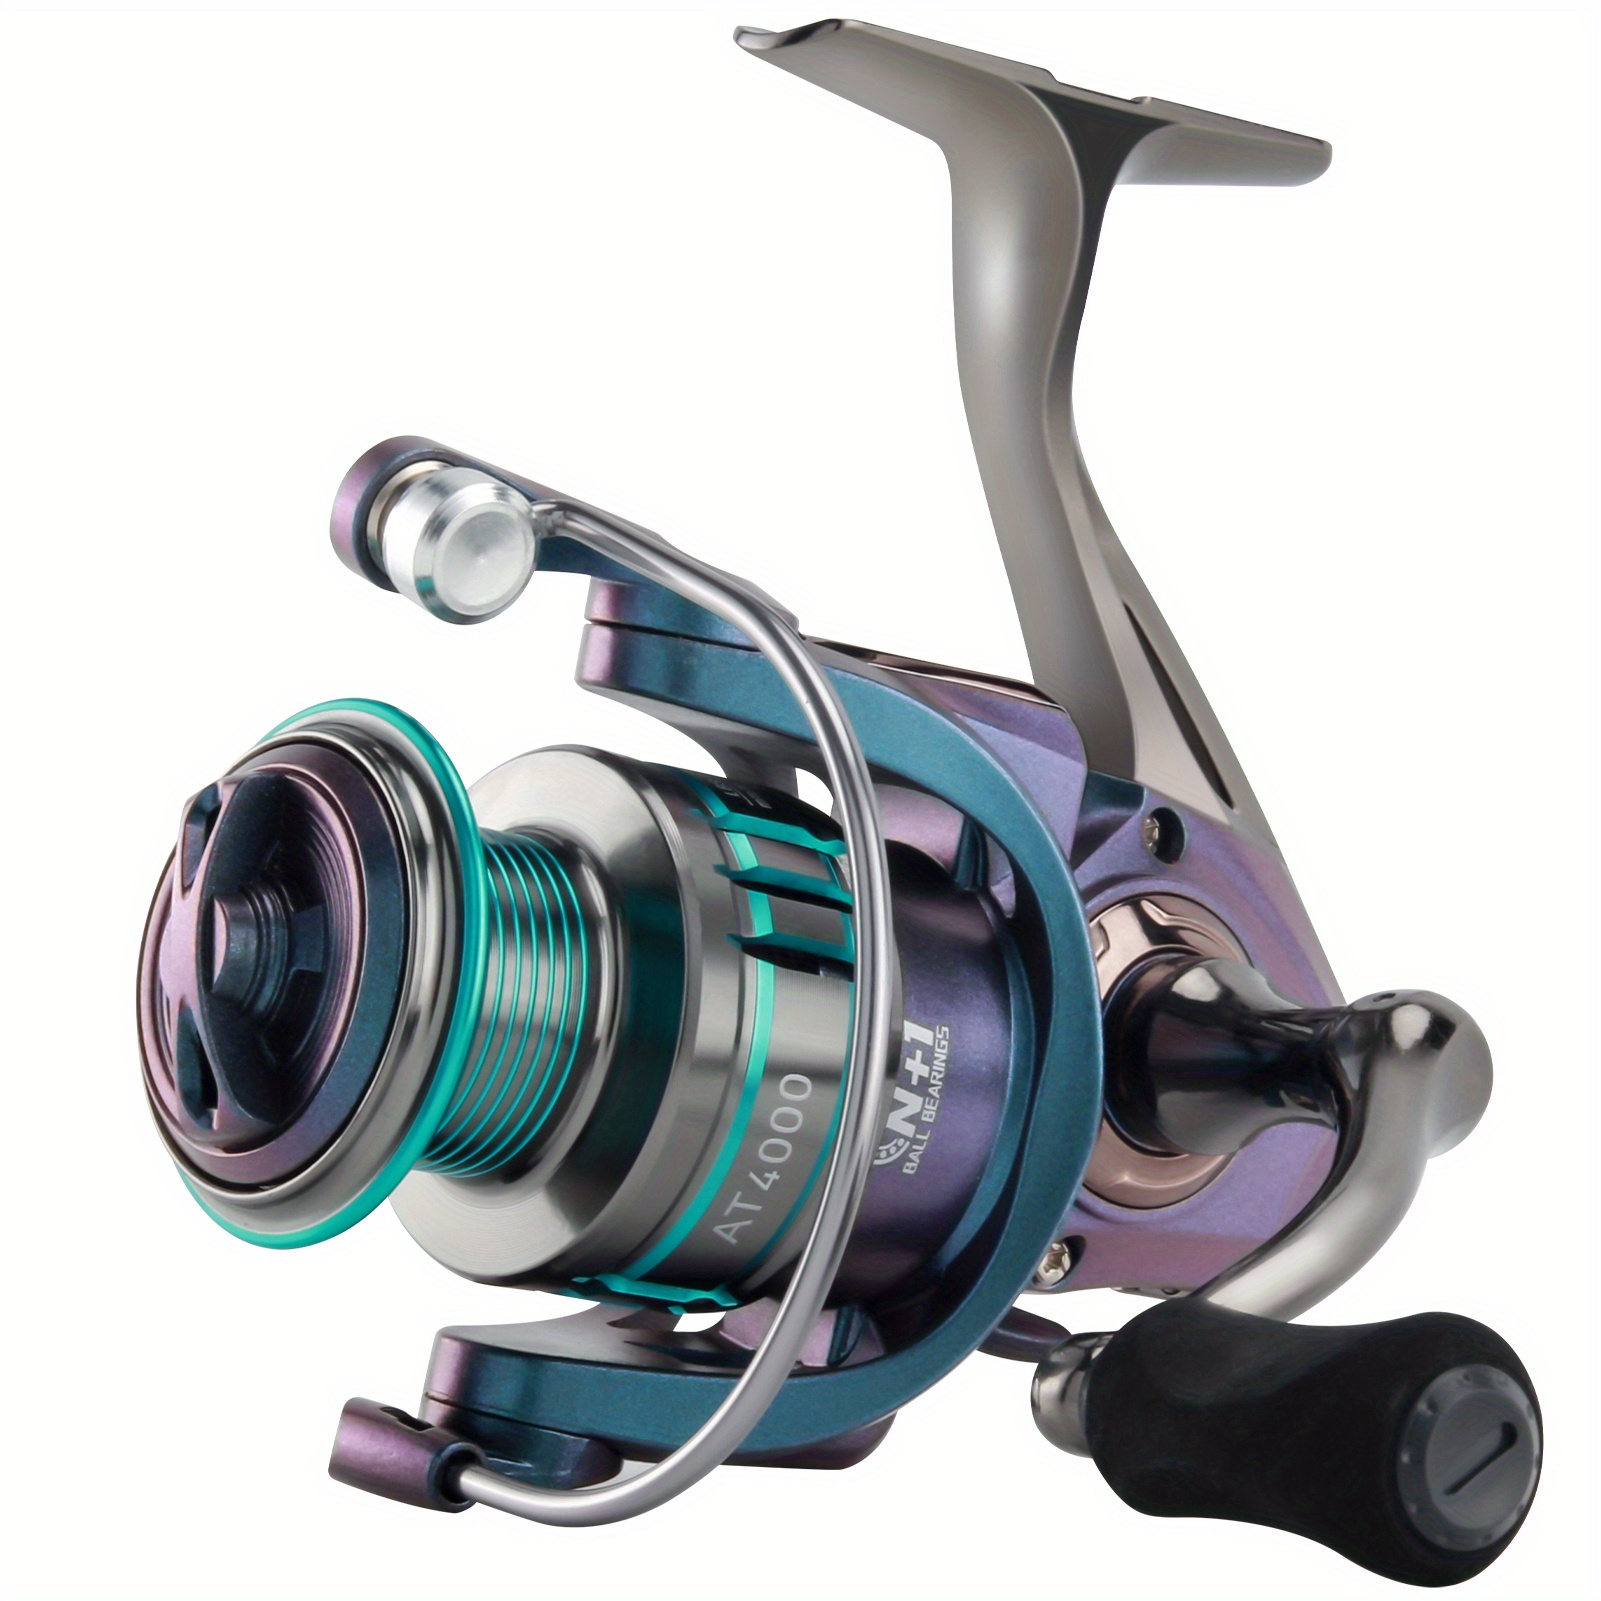 HAUT TON Spinning Reel Macaroon Beginner's Edition ,5+1BB Ultralight  Fishing Reels,5.2:1 Gear Ratio 18LBs Max Drag for icefish and  Freshwater,Include